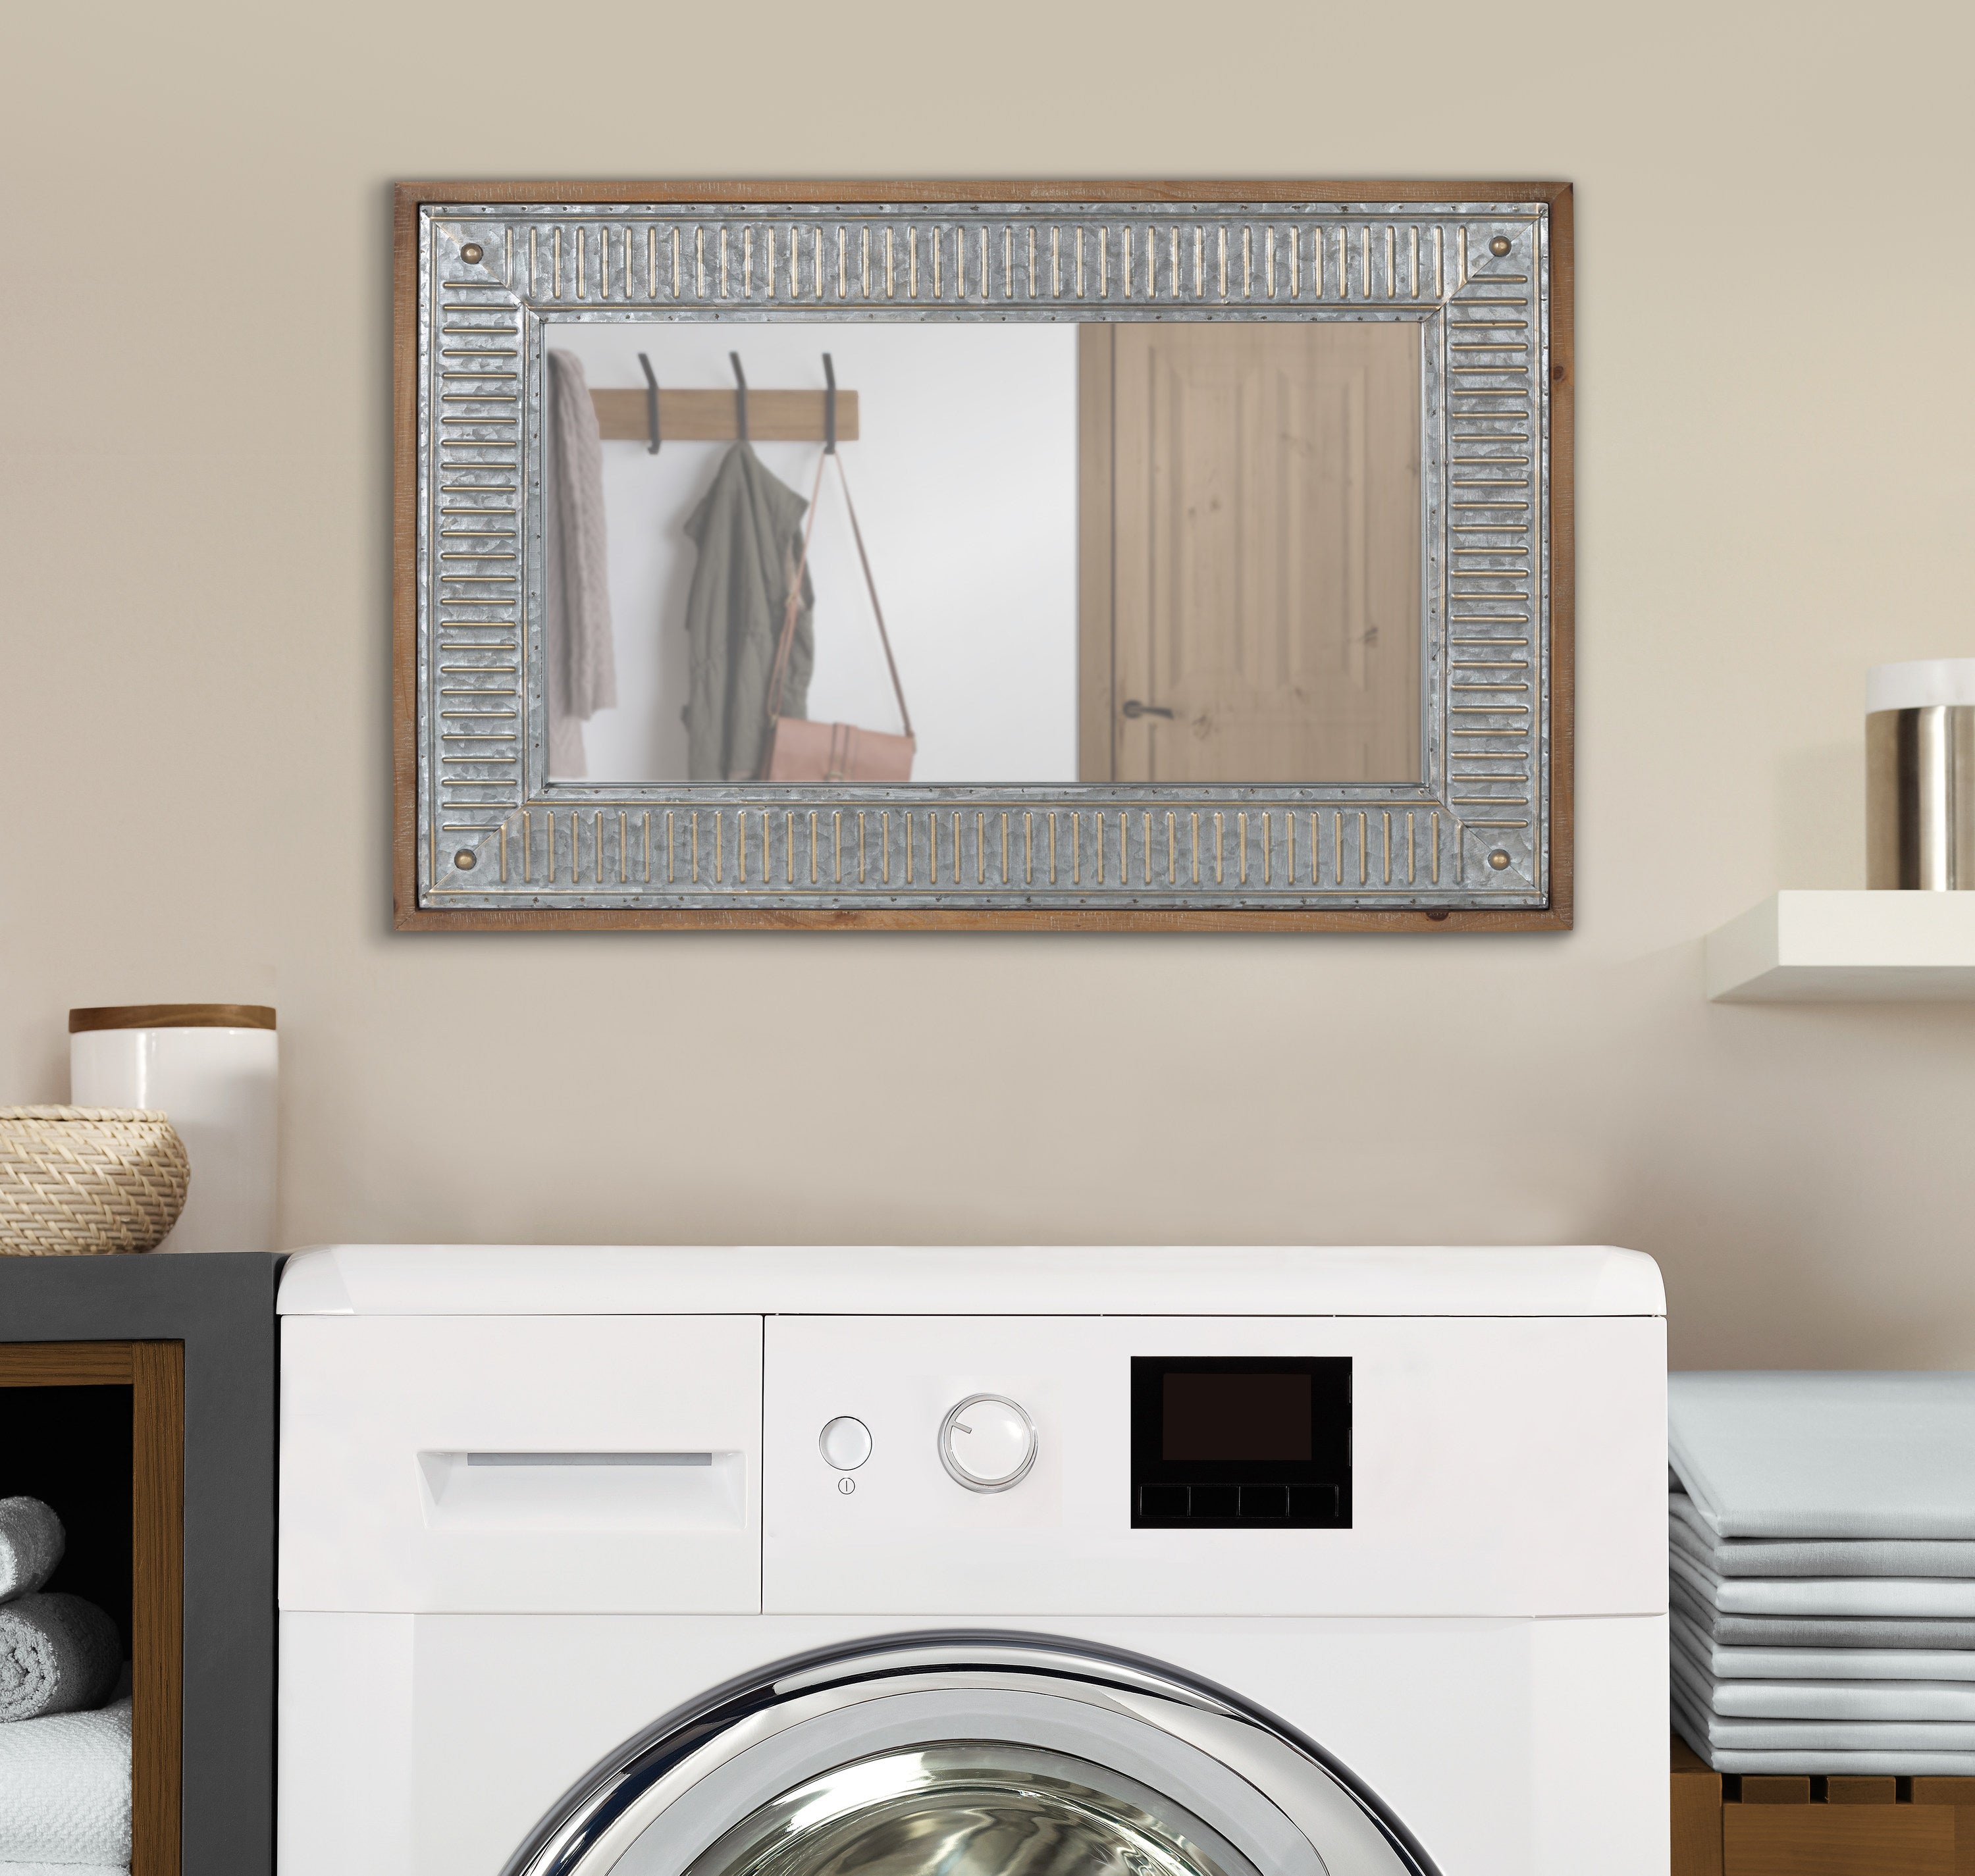 Deely Wood and Metal Wall Mirror